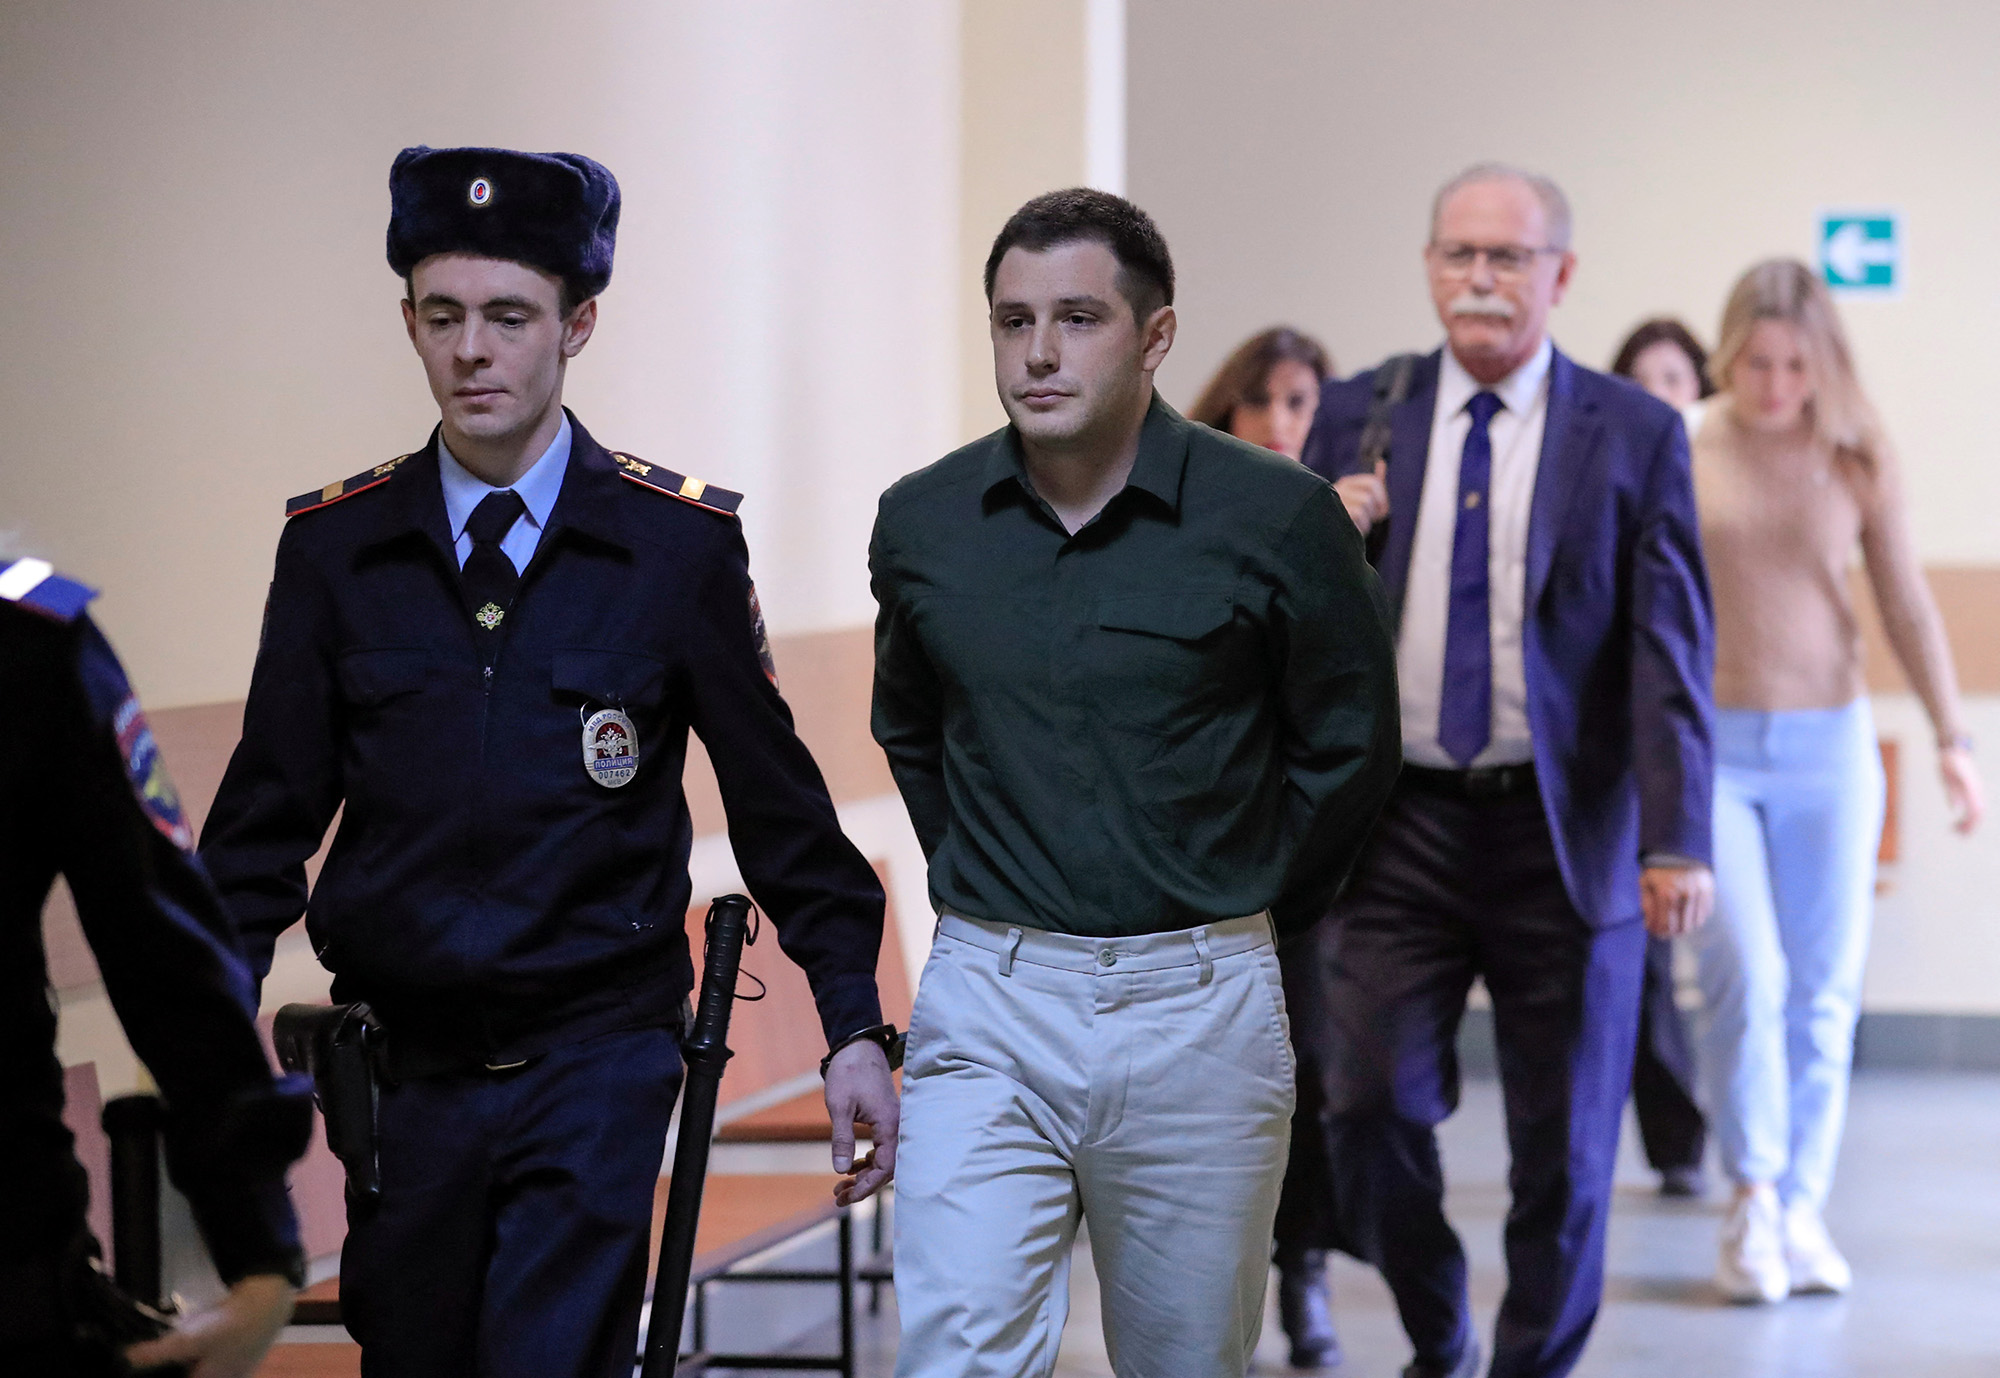 U.S. ex-Marine Trevor Reed, who was detained in 2019 and accused of assaulting police officers, is escorted before a court hearing in Moscow, Russia, on March 11, 2020.